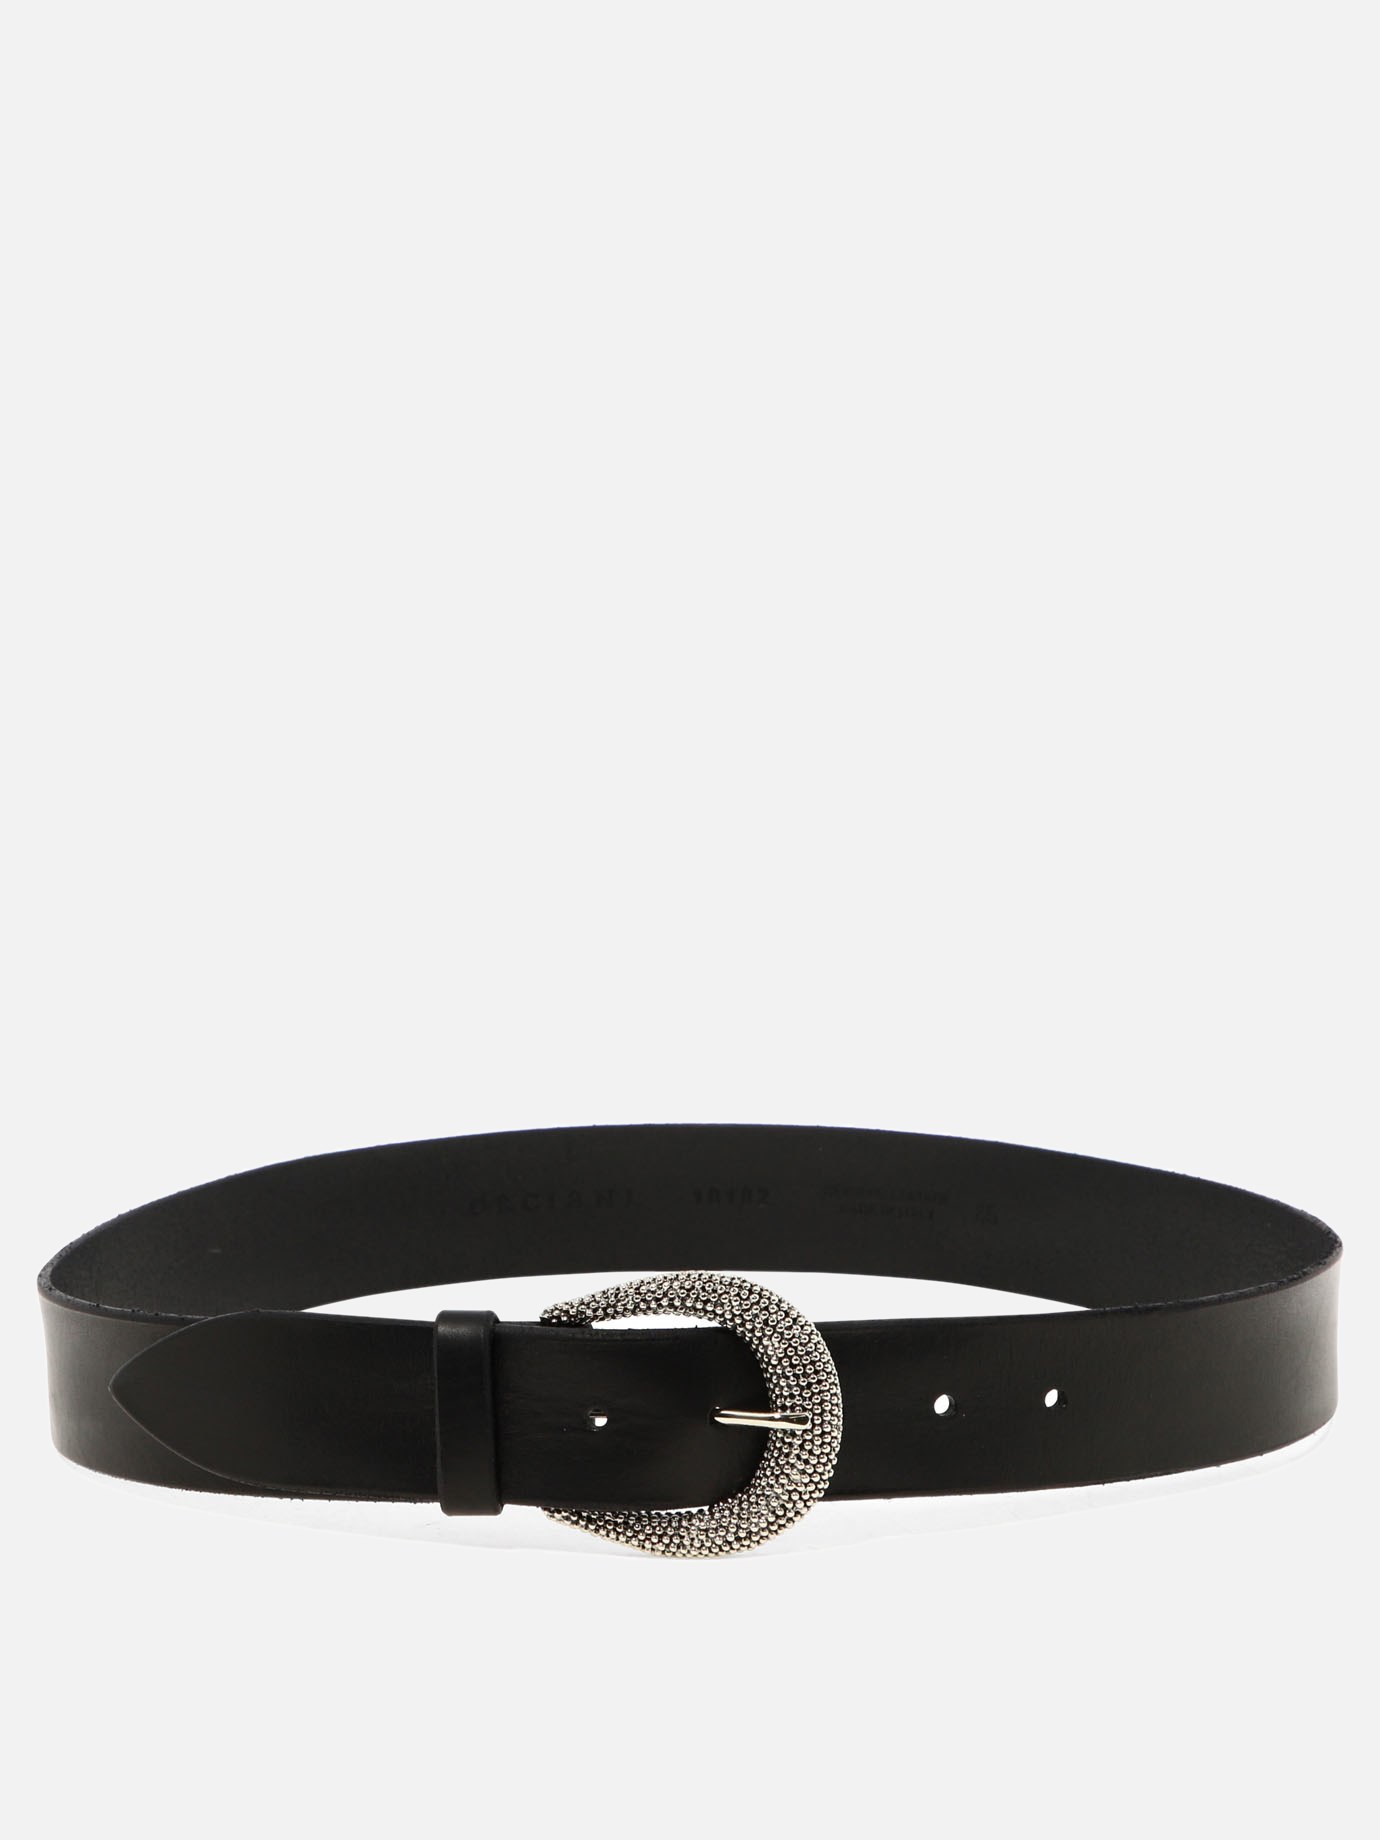 Belt with silver buckle by Orciani